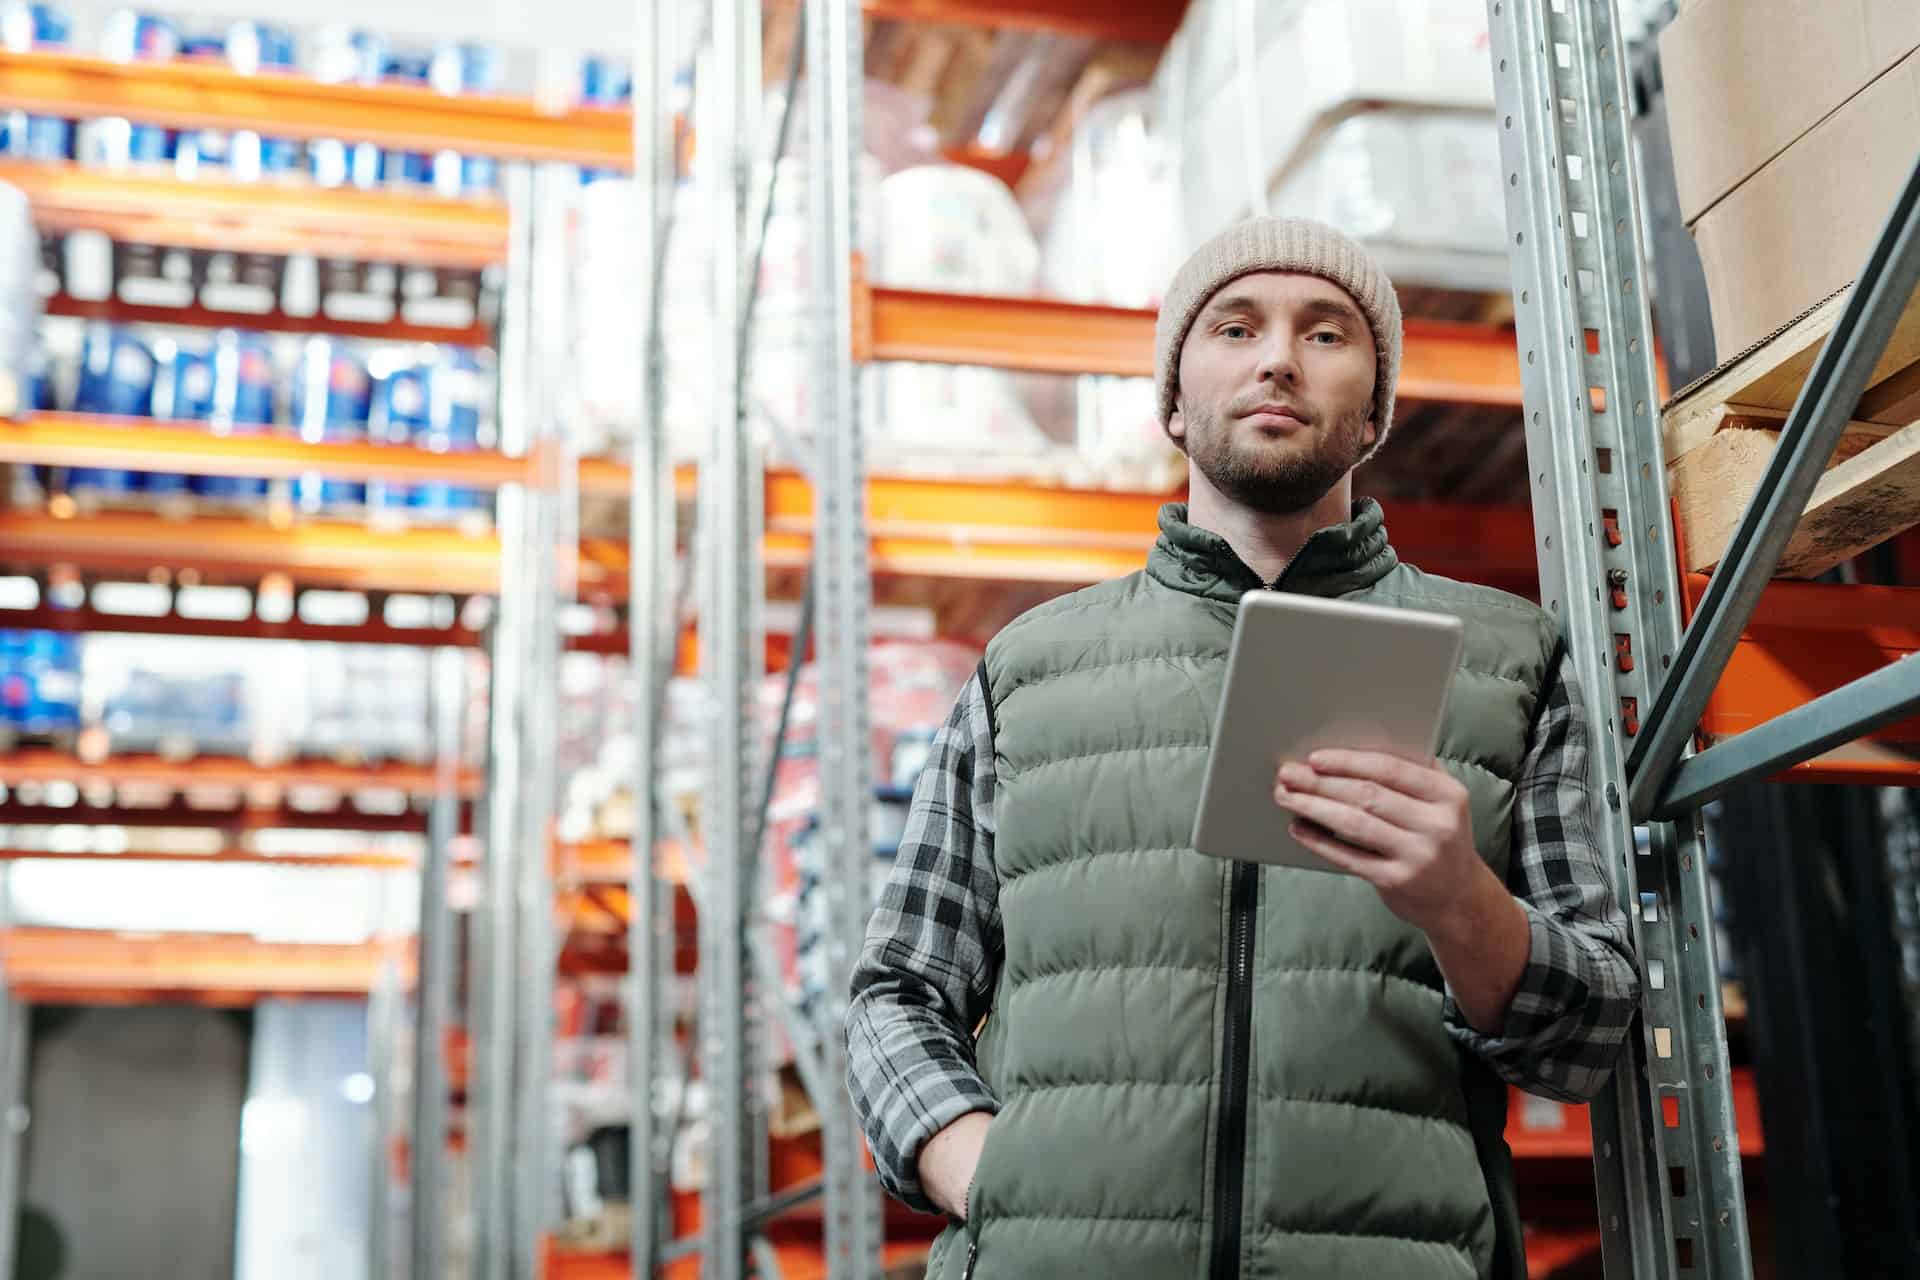 How to Run an Efficient Warehouse: 16 Productivity Tips featured image